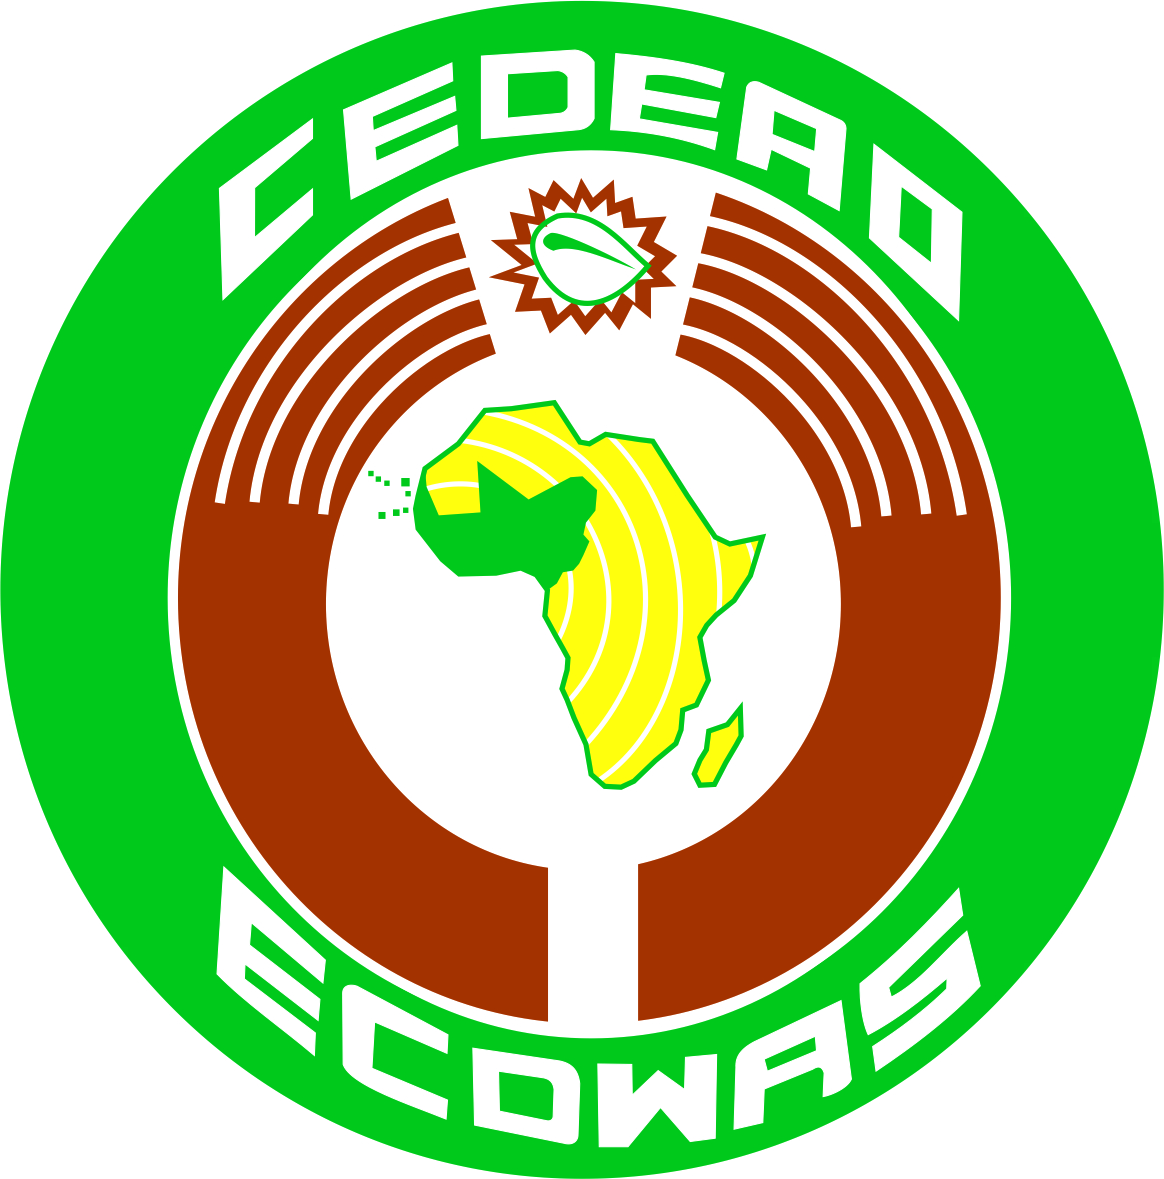 Competition Experts Met to Review Draft Harmonized Frame-Work of Ecowas Regional Competition Authority